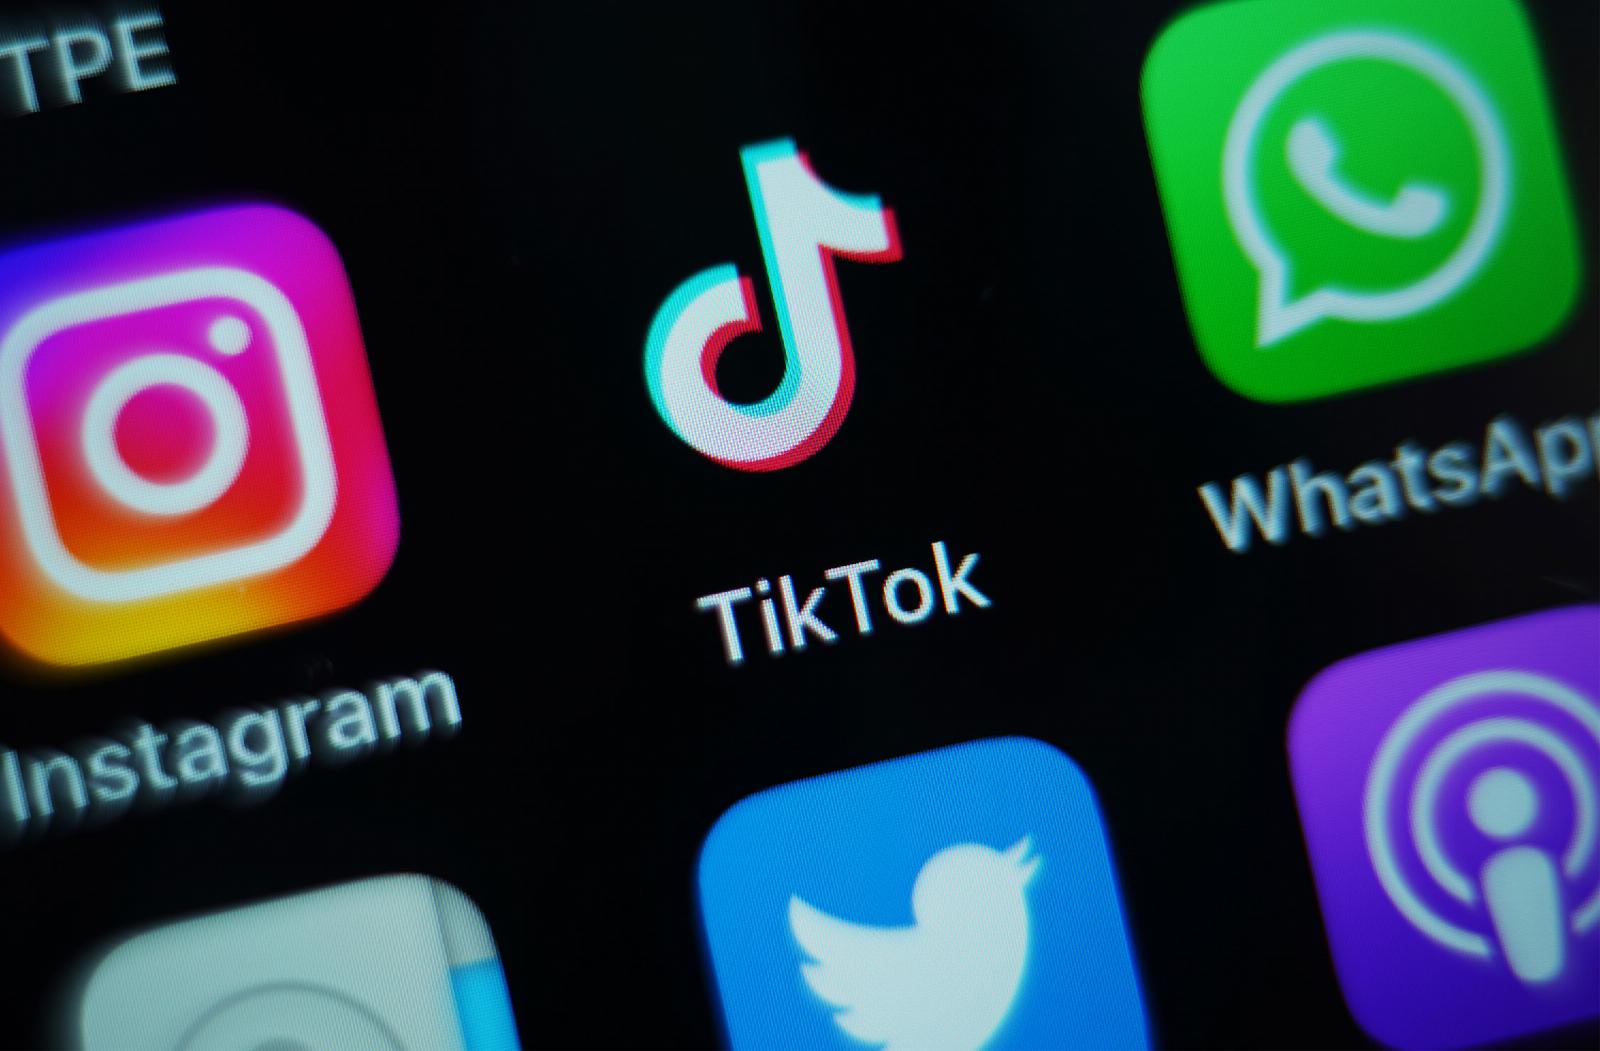 TikTok expands its ‘Series’ paywall feature to more creators